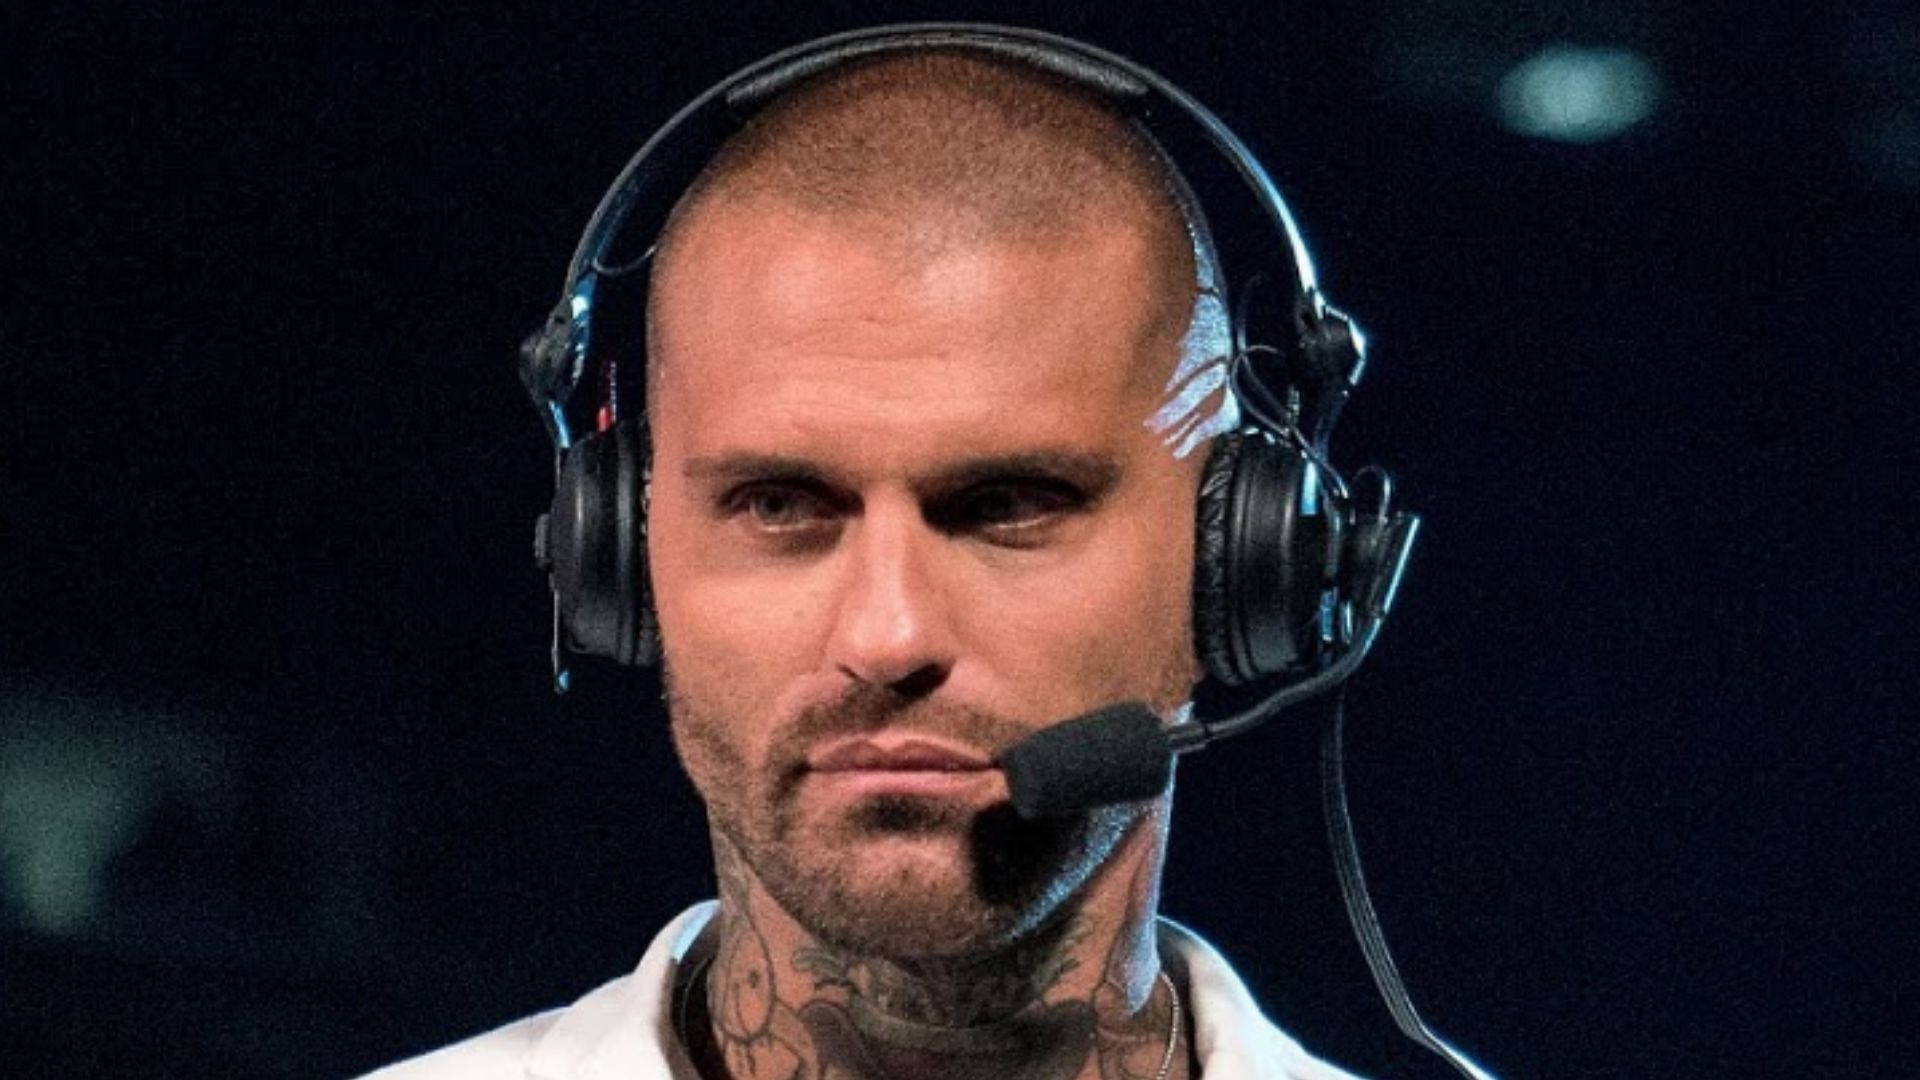 Corey Graves works as a color commentator on RAW